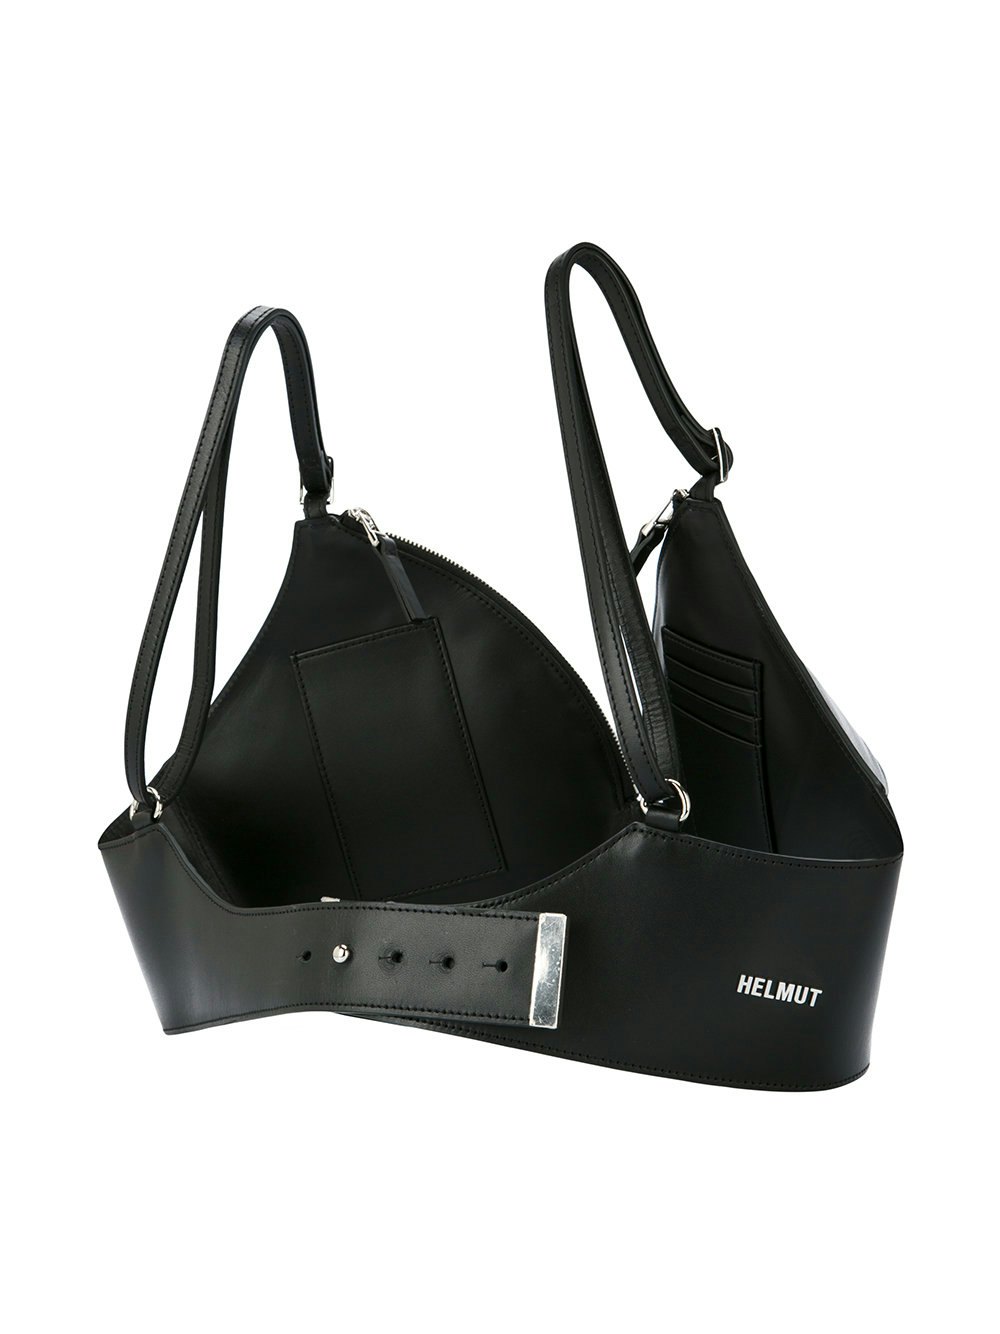 Helmut Lang's Bra-Shaped Bag Actually Doubles Up As Underwear